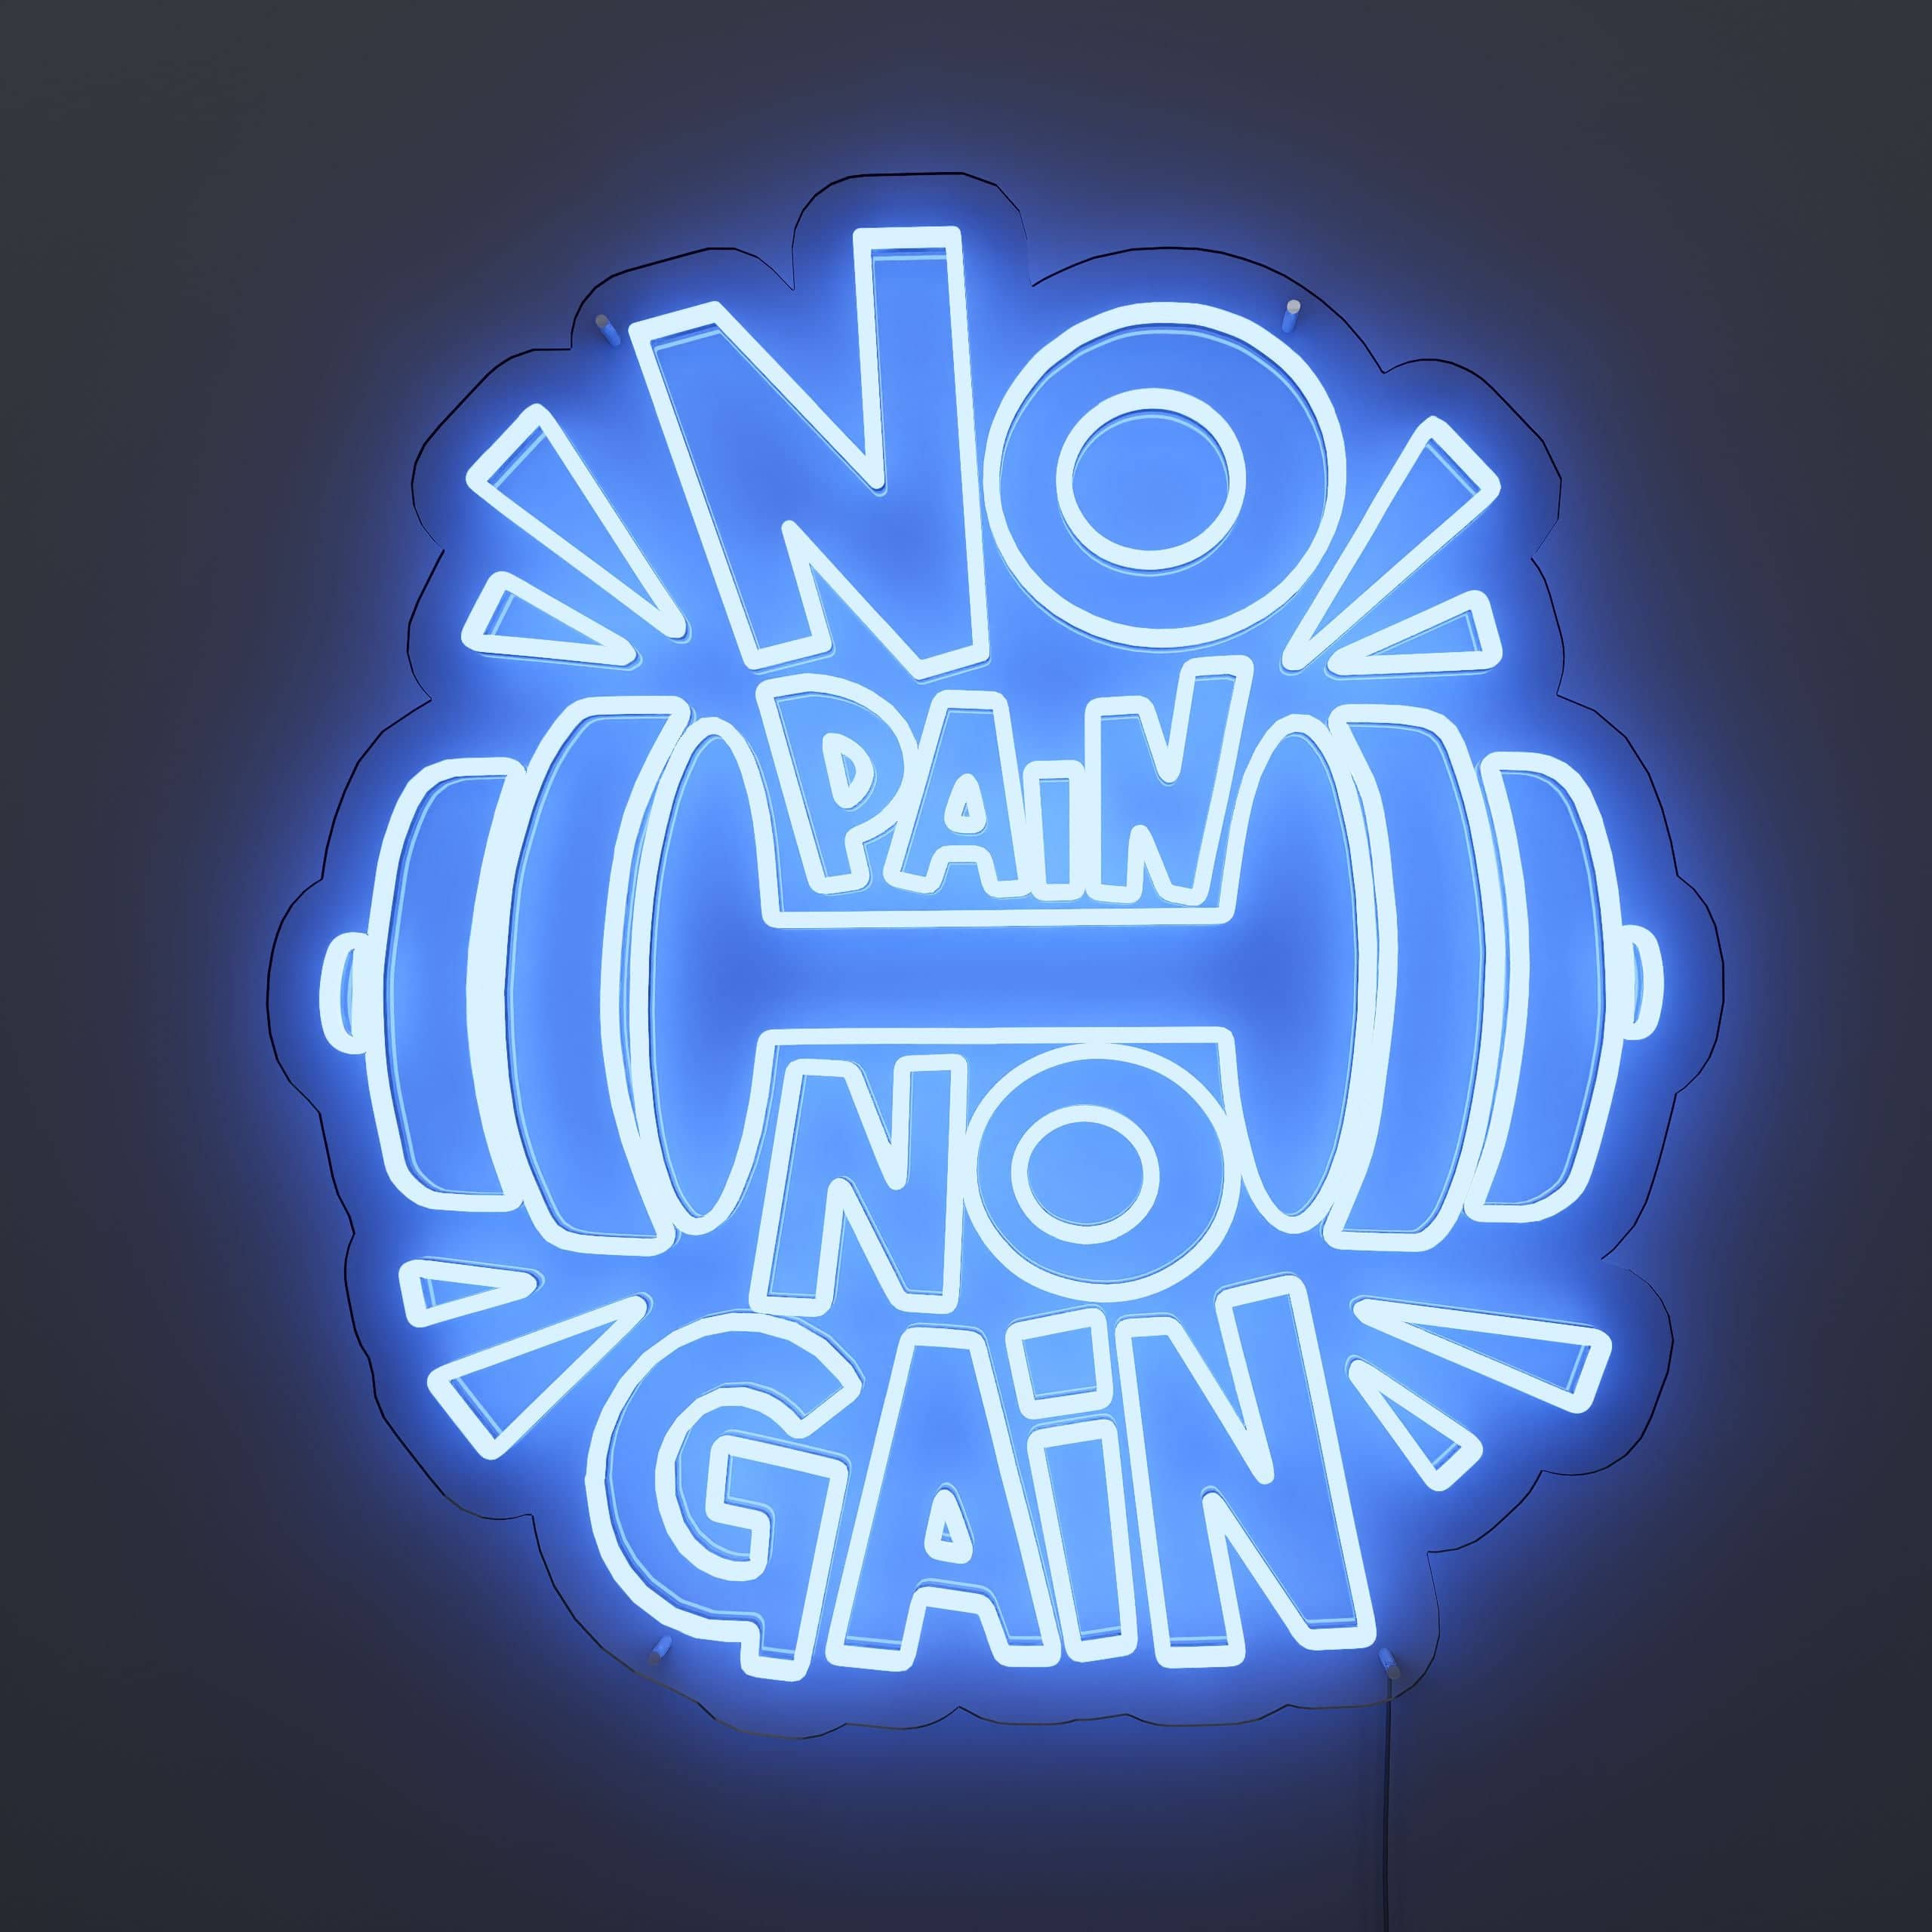 glowing-sign:-persistence-leads-to-progress-neon-sign-lite